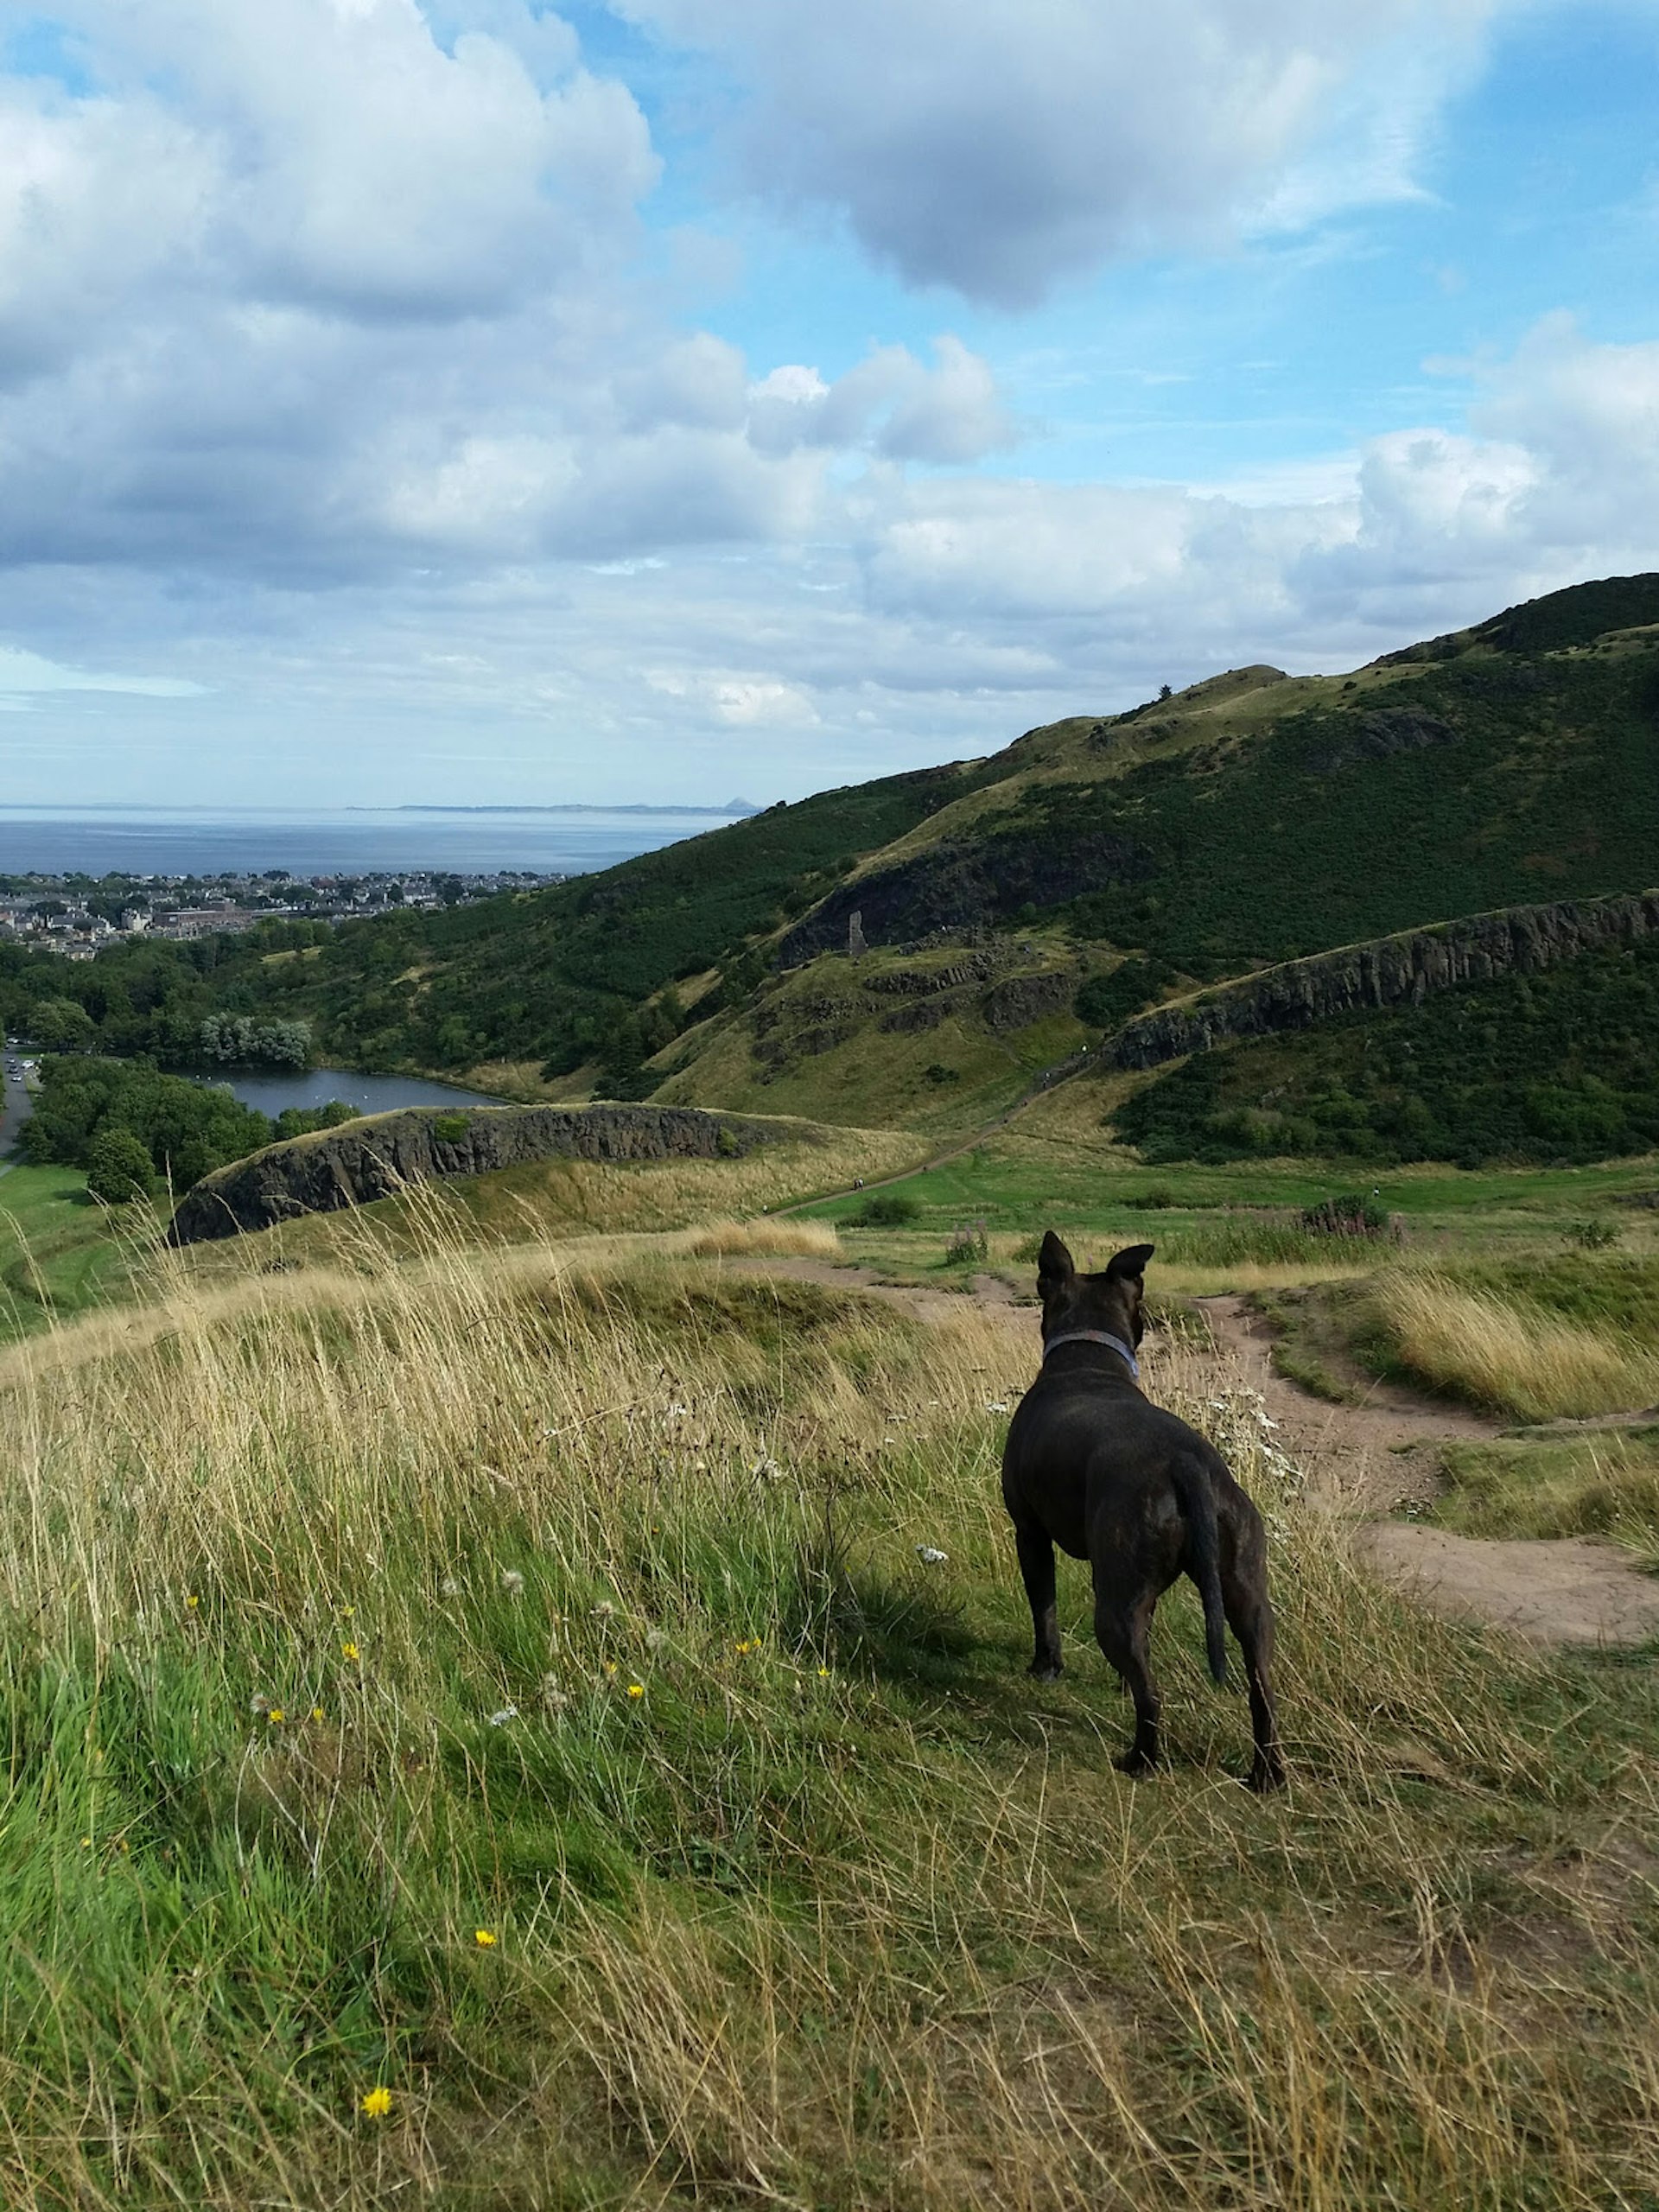 Arthur's Seat, with the Firth of Forth in the background © Chitra Ramaswamy / Lonely Planet